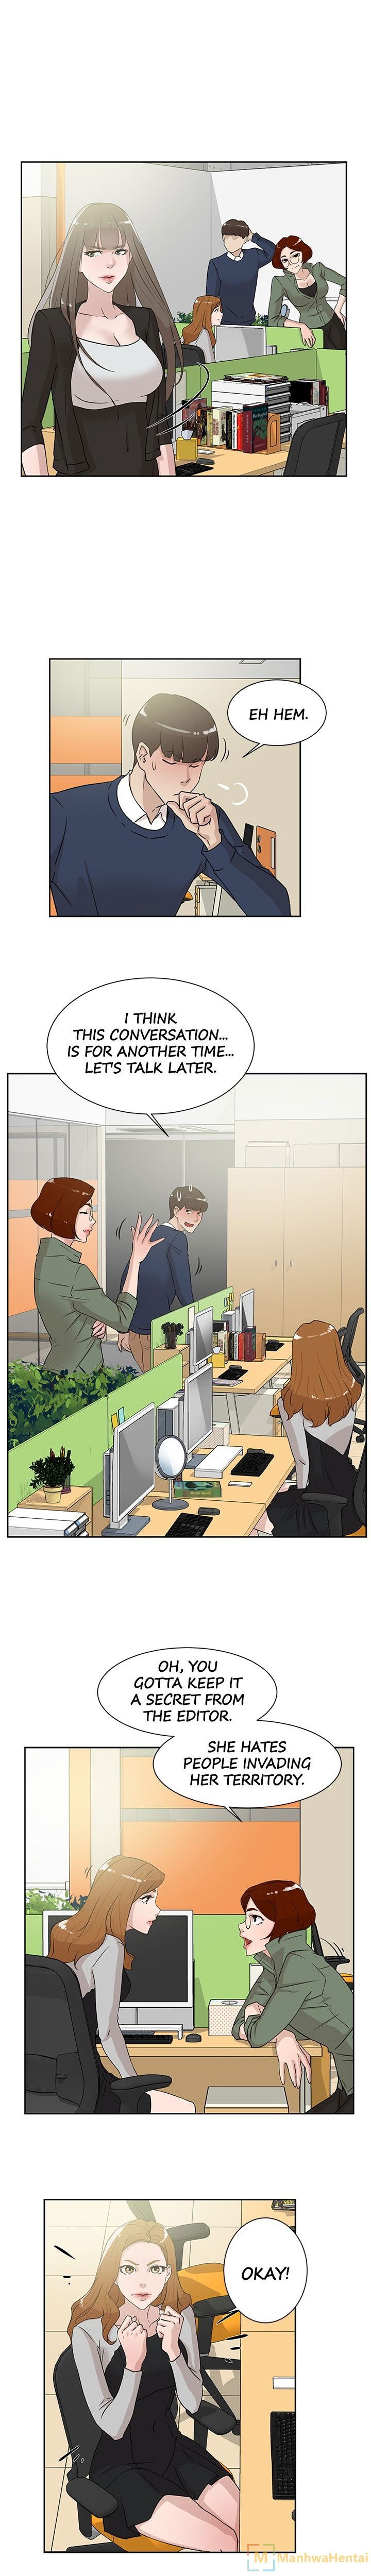 office-affairs-chap-29-9